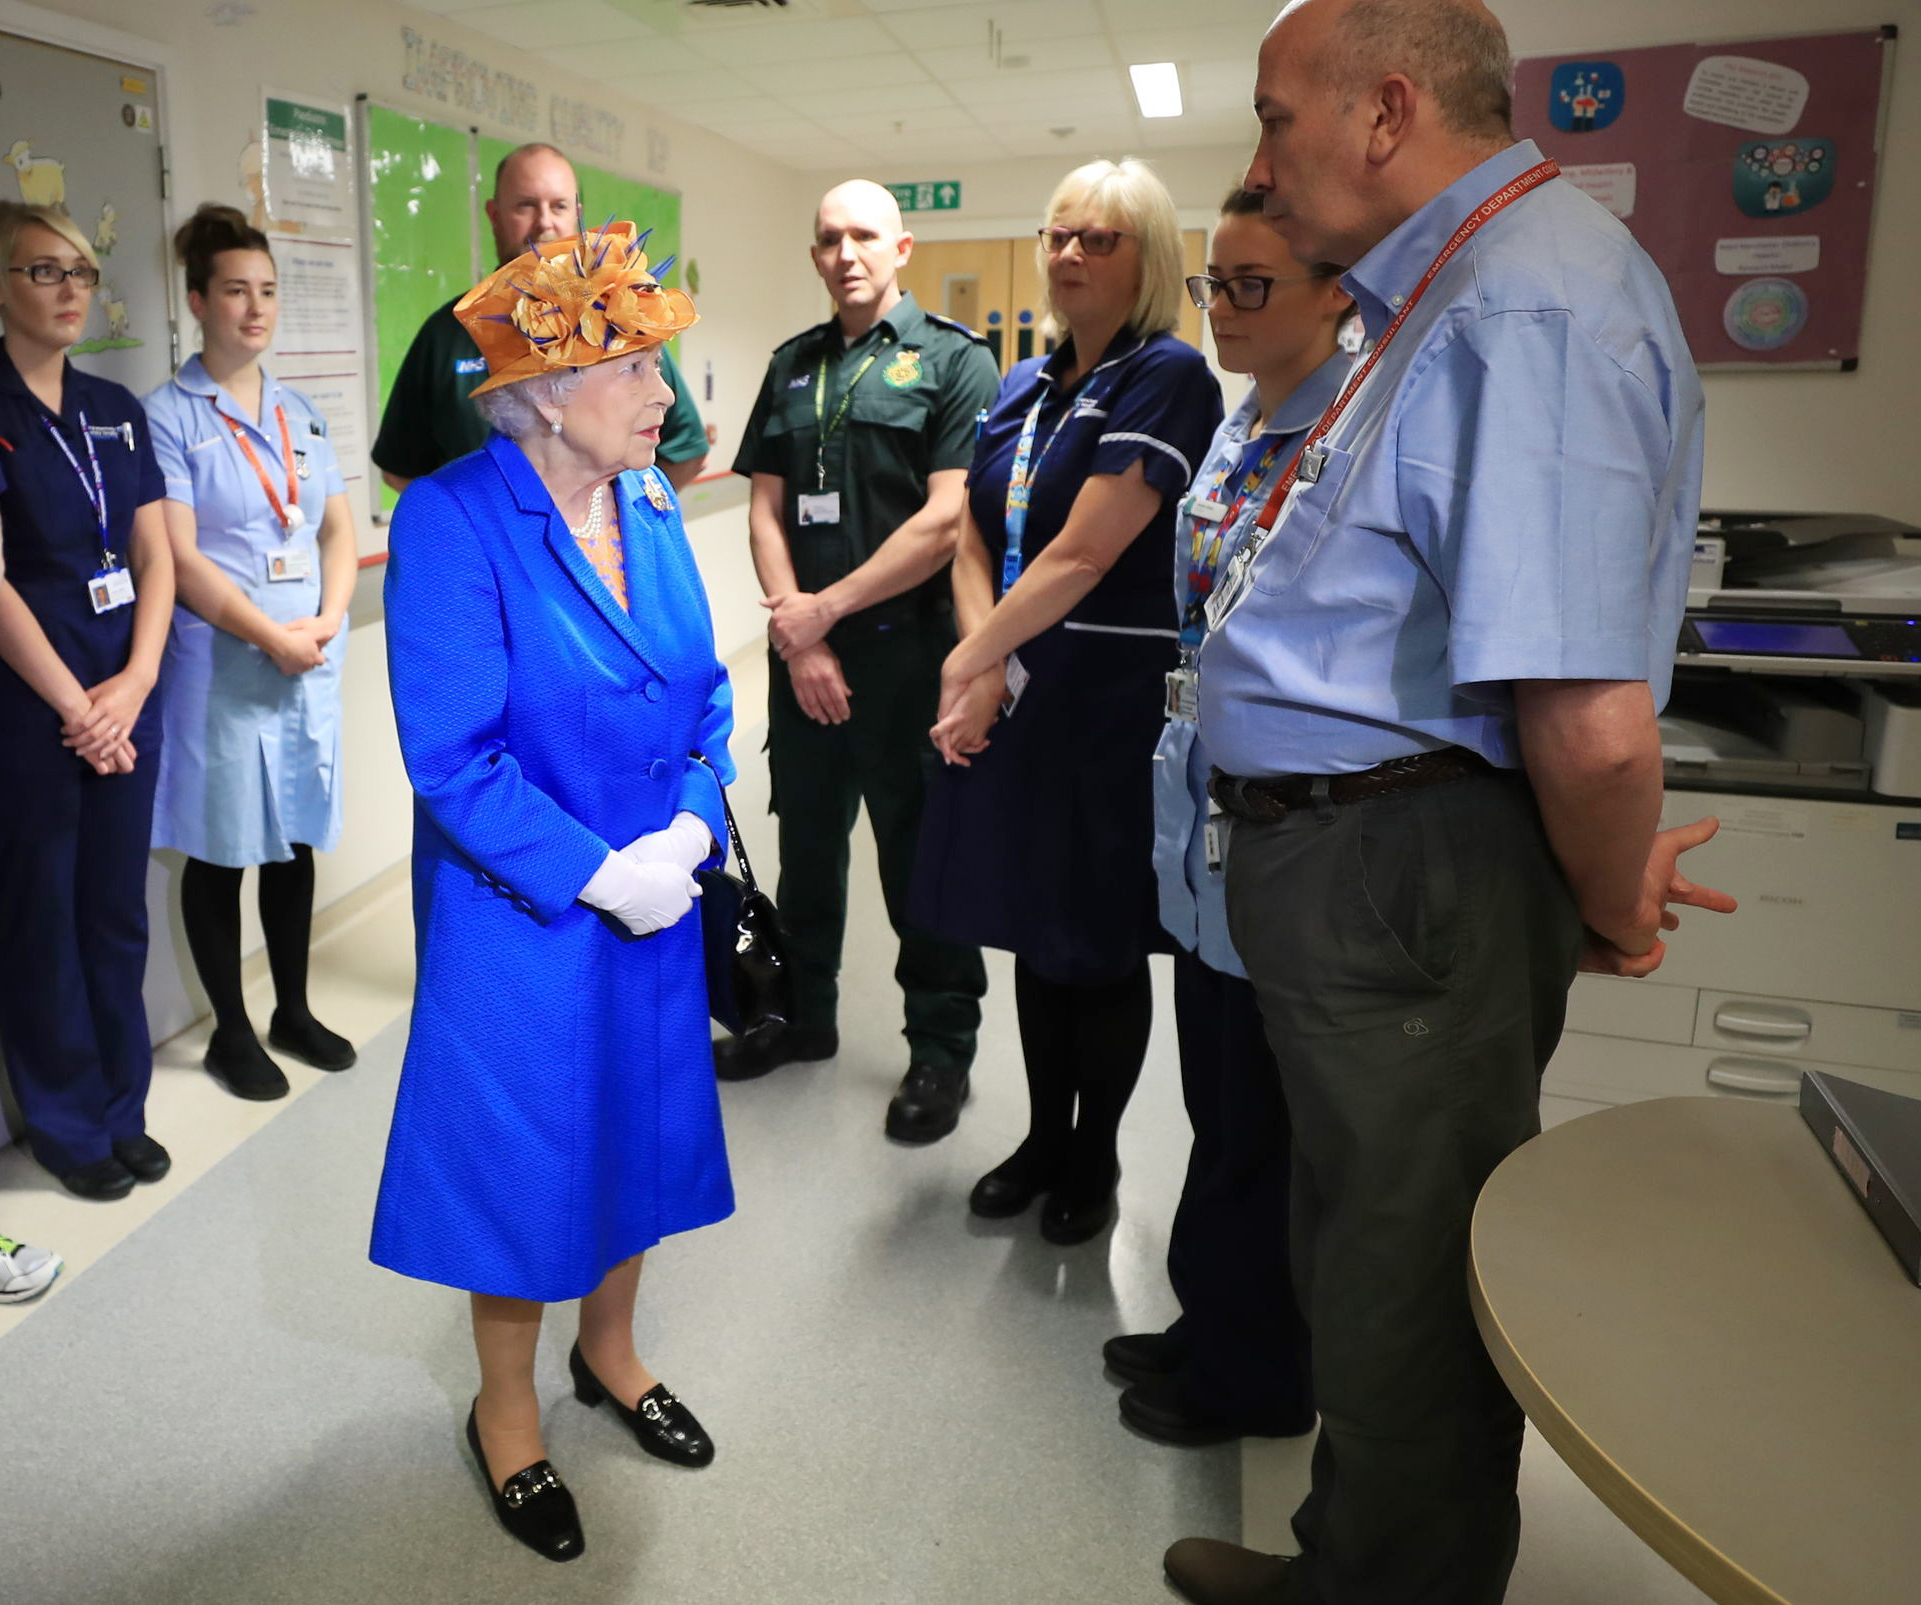 PHOTO:Britain's Queen Elizabeth II speaks with hospital personnel as she visits the Royal Manchester Children's Hospital to meet victims and to thank members of staff who treated them, May 25, 2017.